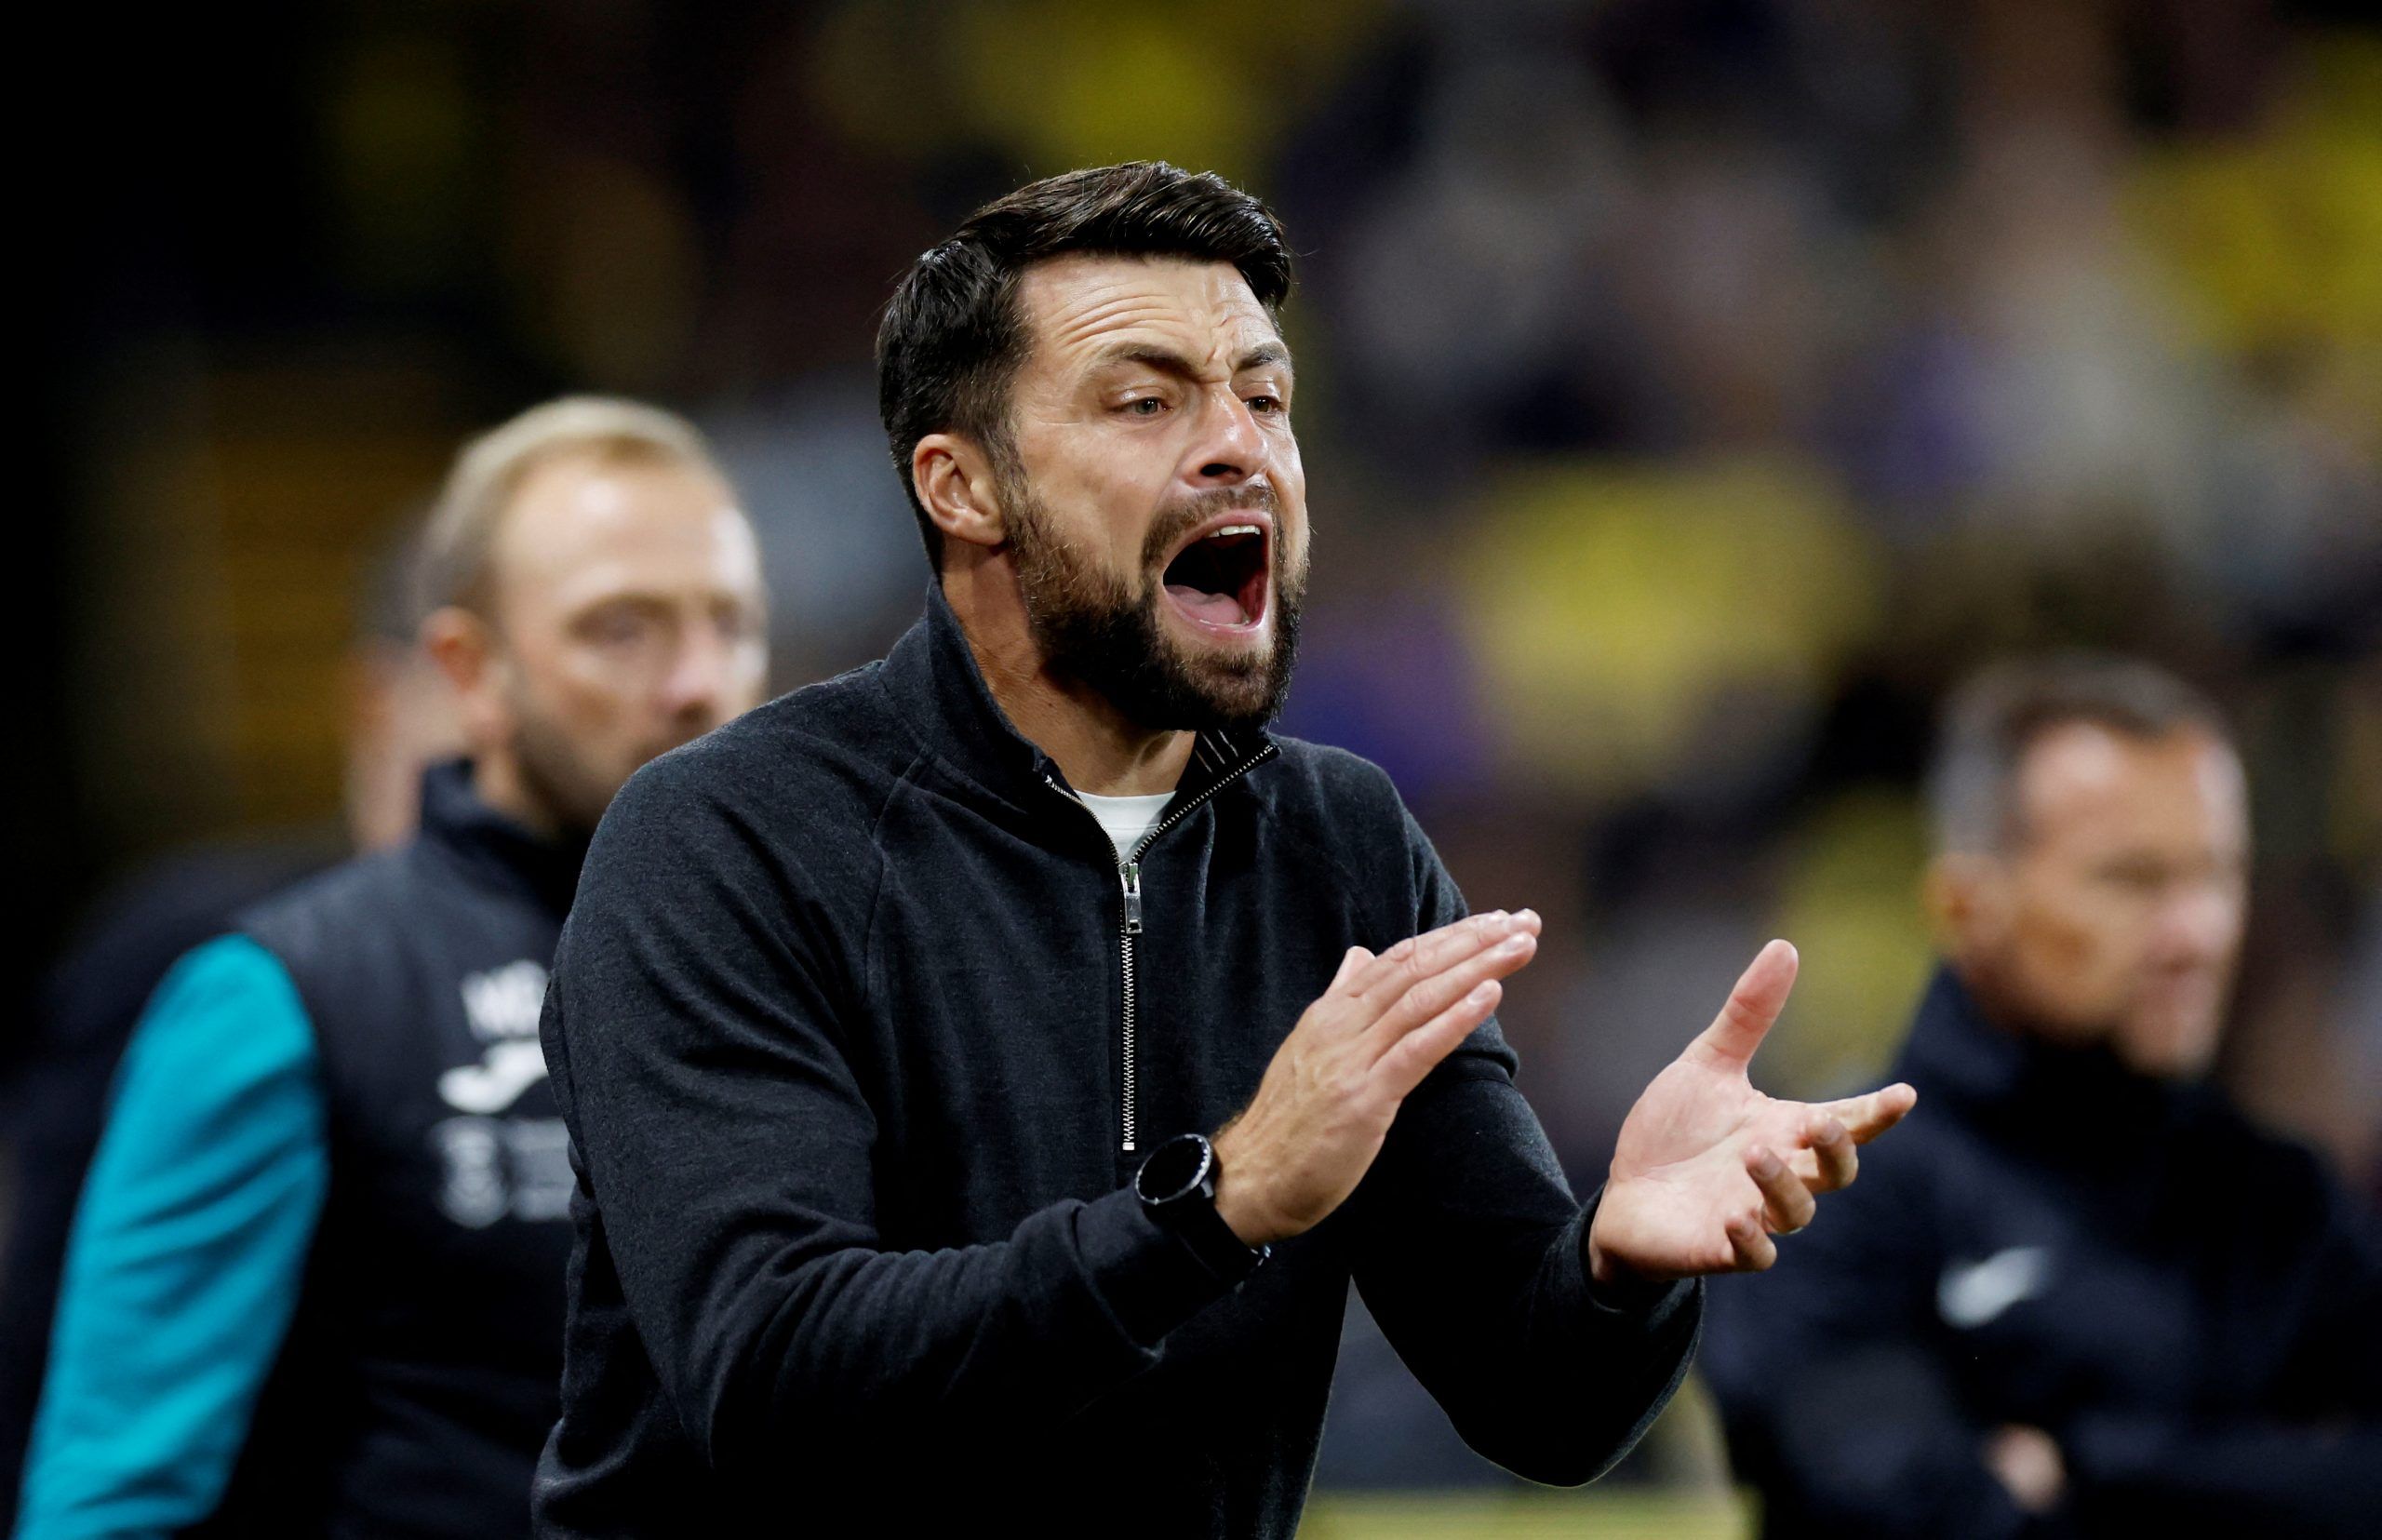 Soccer Football - Championship - Watford v Swansea City - Vicarage Road, Watford, Britain - October 5, 2022 Swansea City manager Russell Martin reacts  Action Images/Peter Cziborra  EDITORIAL USE ONLY. No use with unauthorized audio, video, data, fixture lists, club/league logos or 